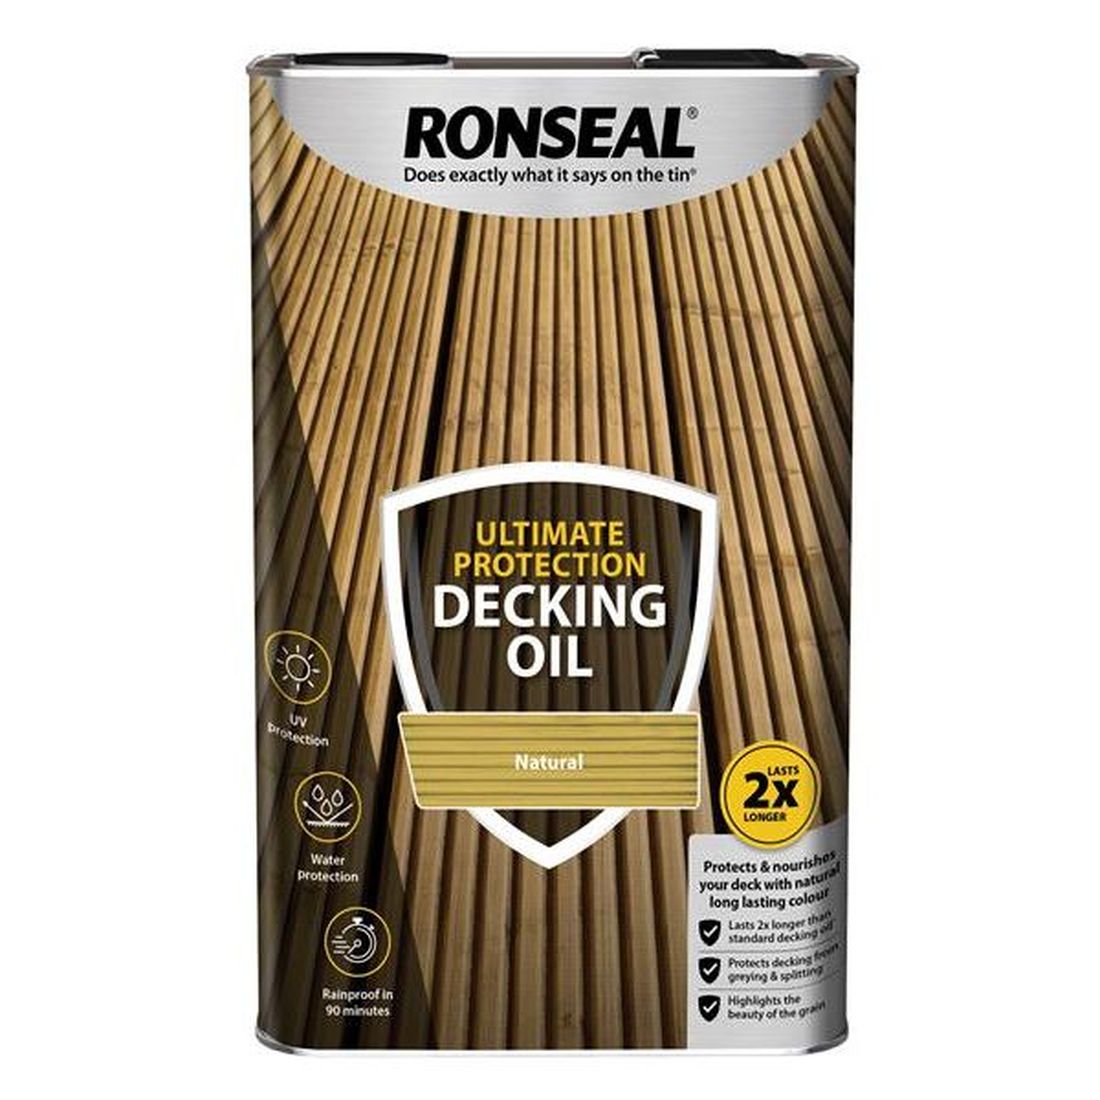 Ronseal Ultimate Protection Decking Oil Natural 5 litre                                 